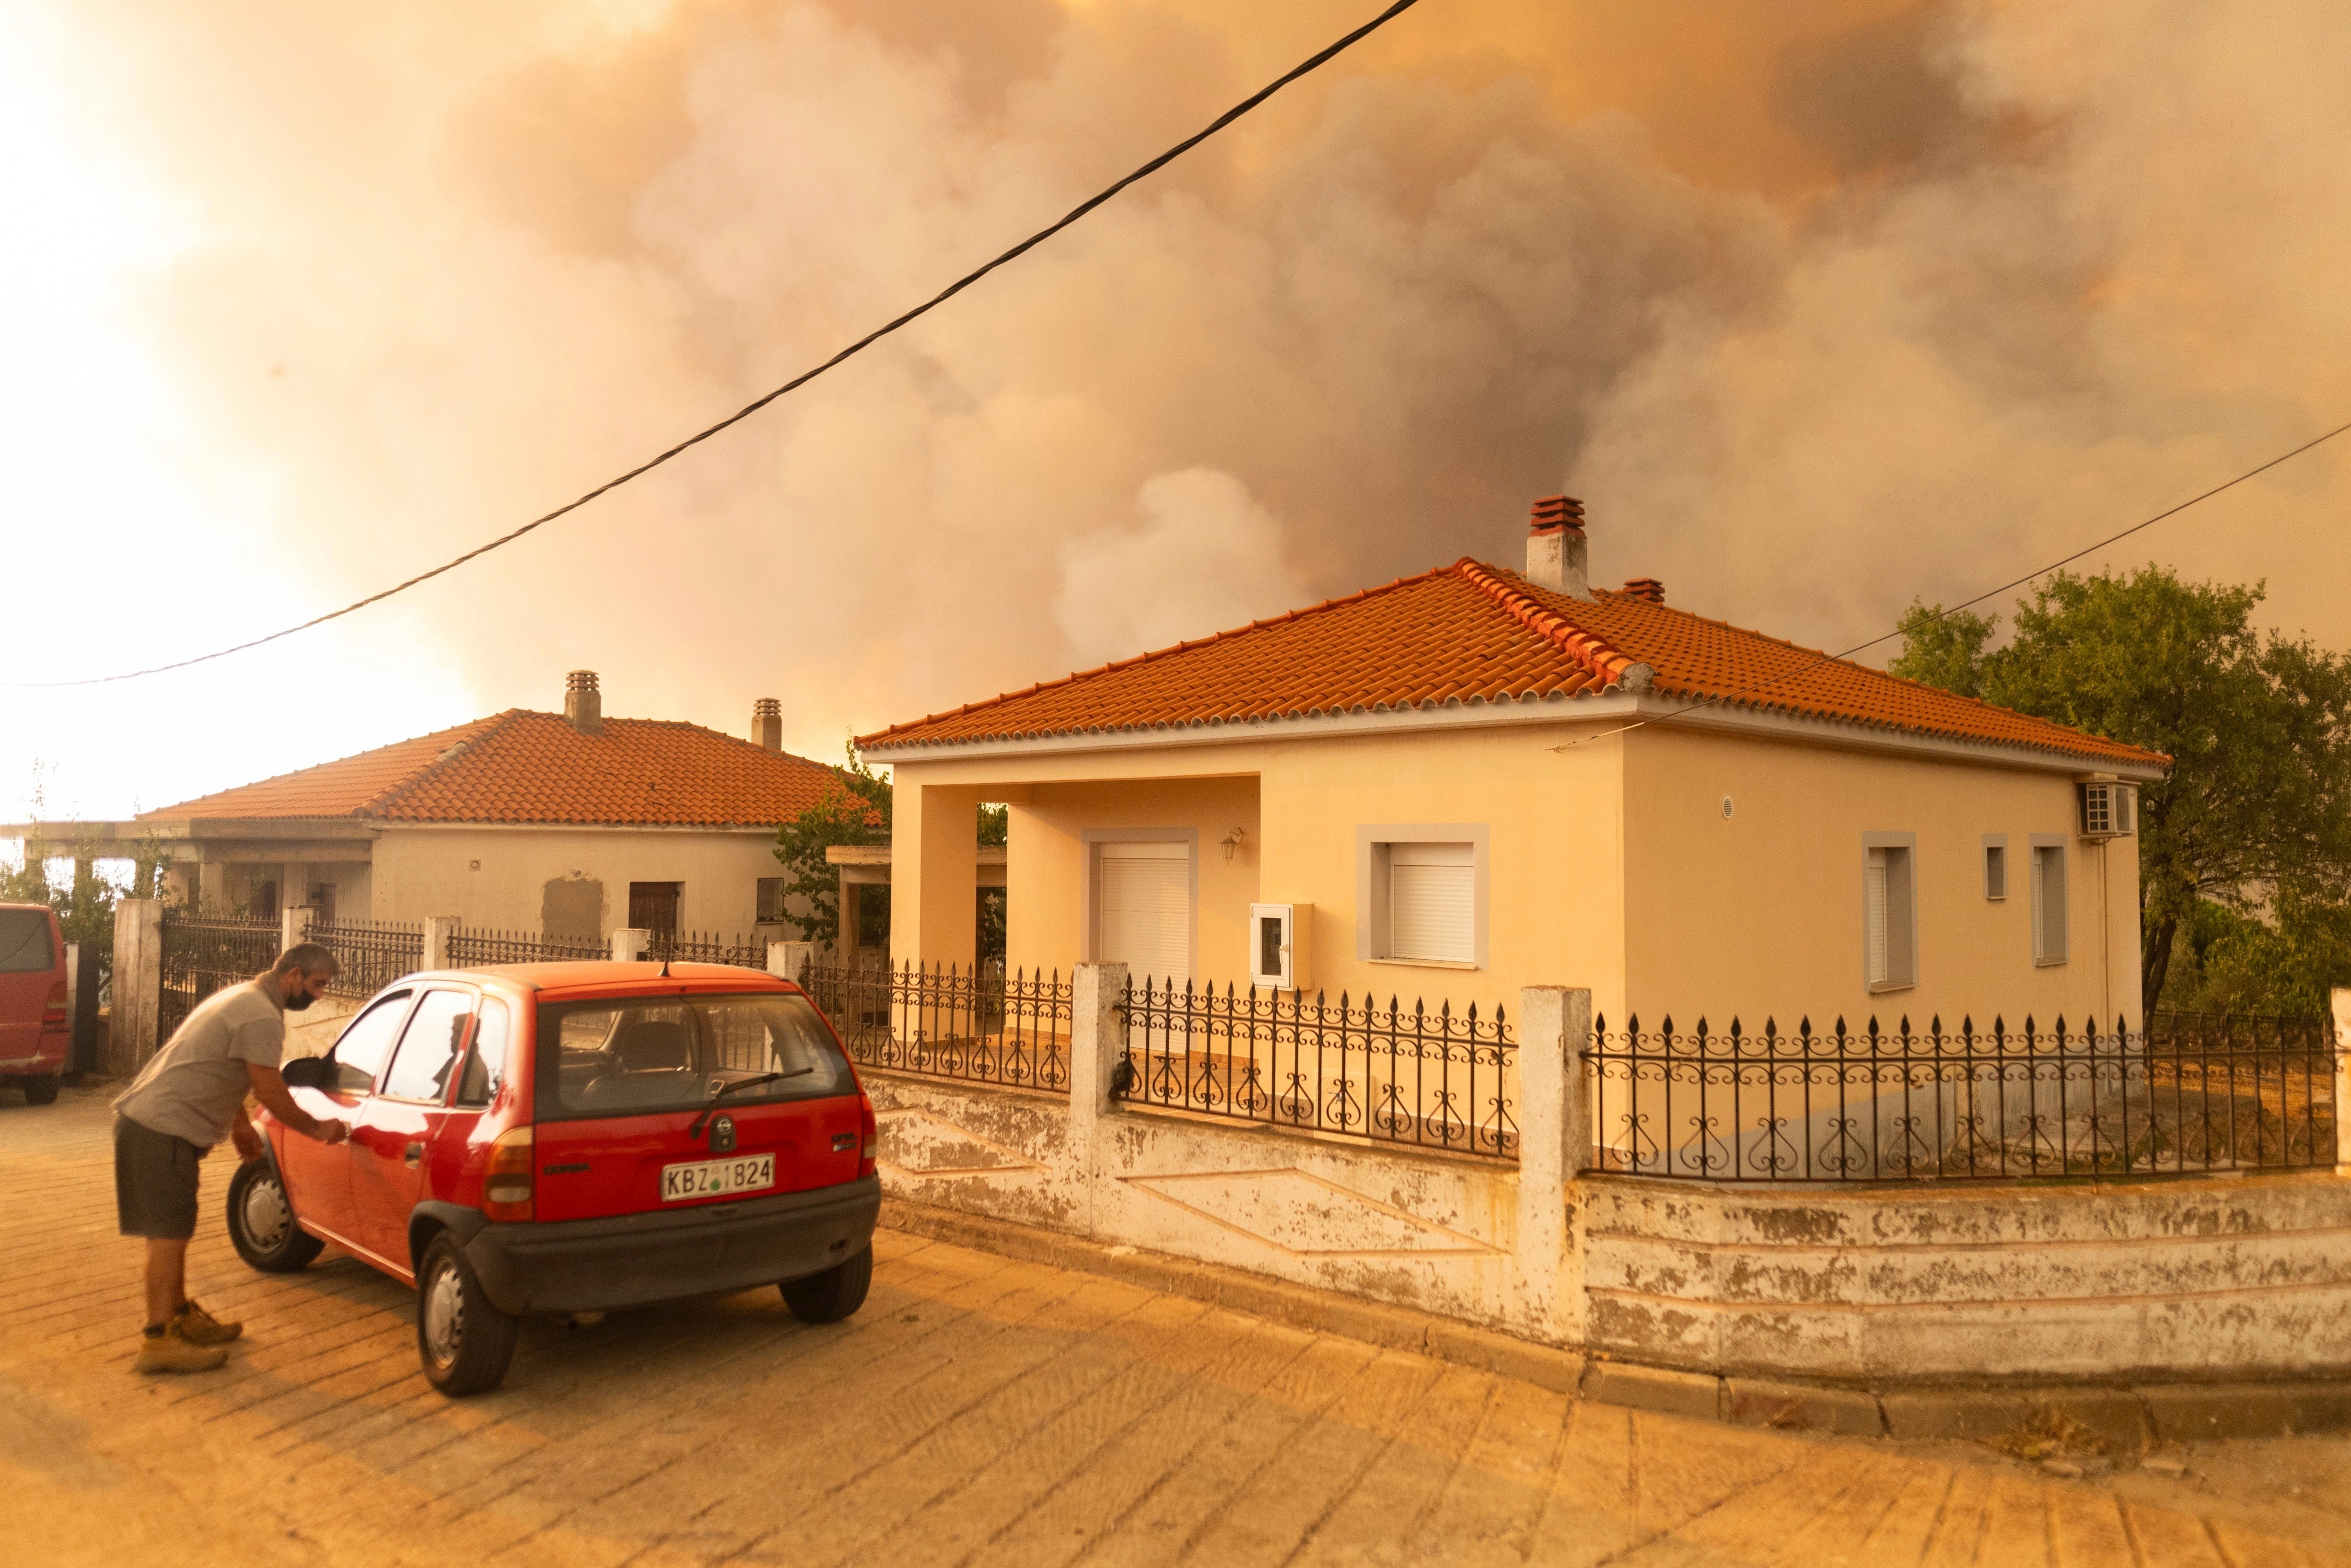 Greece wildfires Arsonist scums will be held accountable as blazes rip through country The Independent